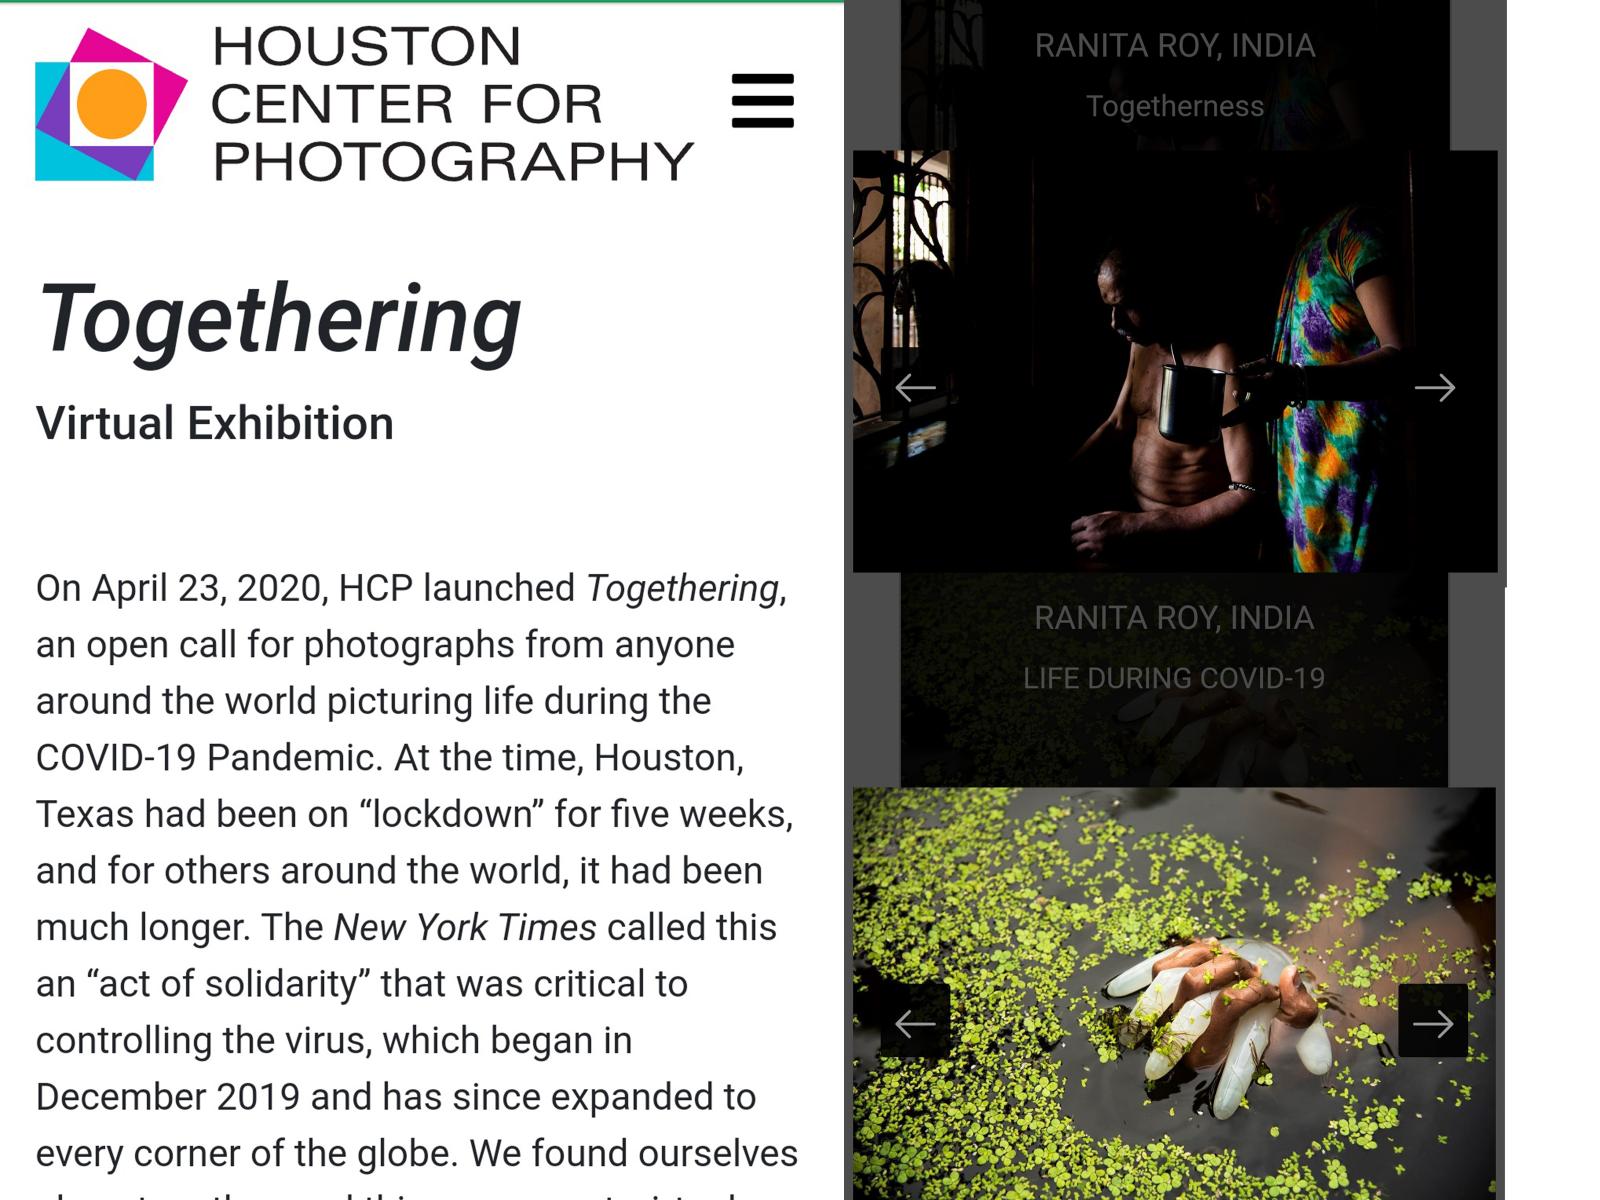 Chosen for Togethering Virtual Exhibition by Houston Center for Photography